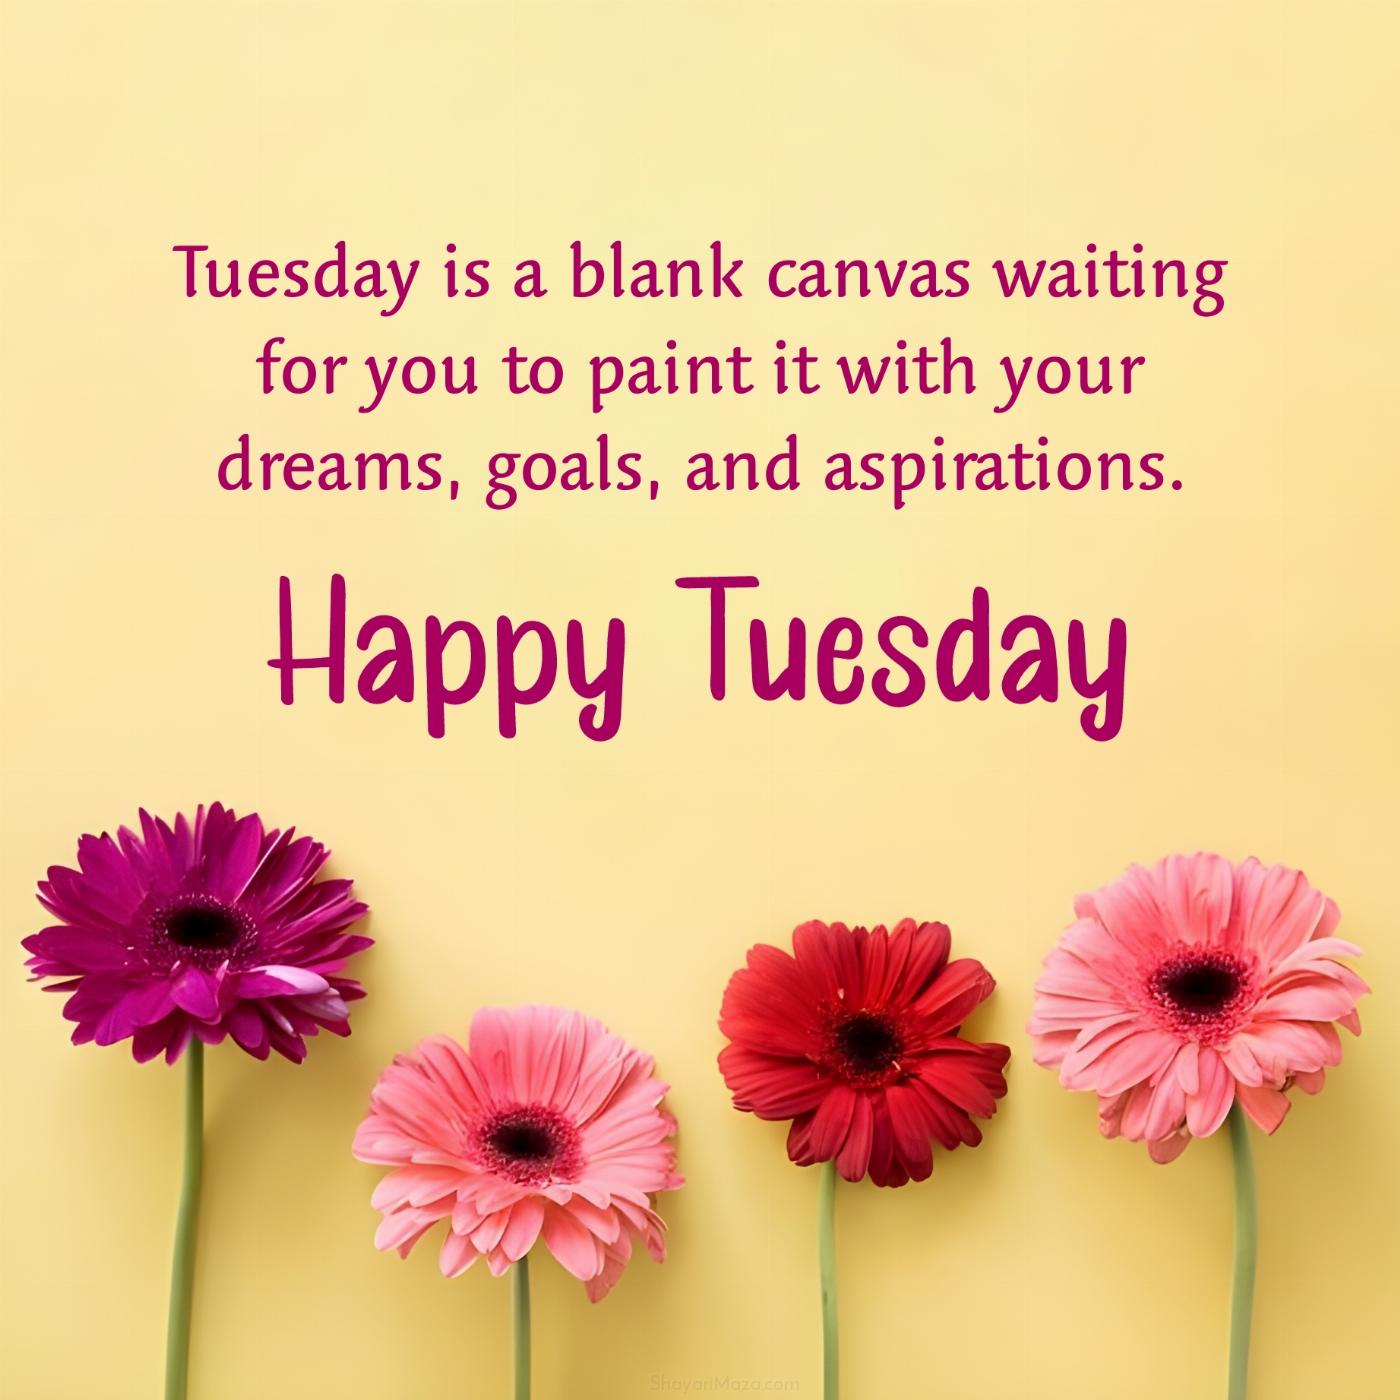 Tuesday is a blank canvas waiting for you to paint it with your dreams